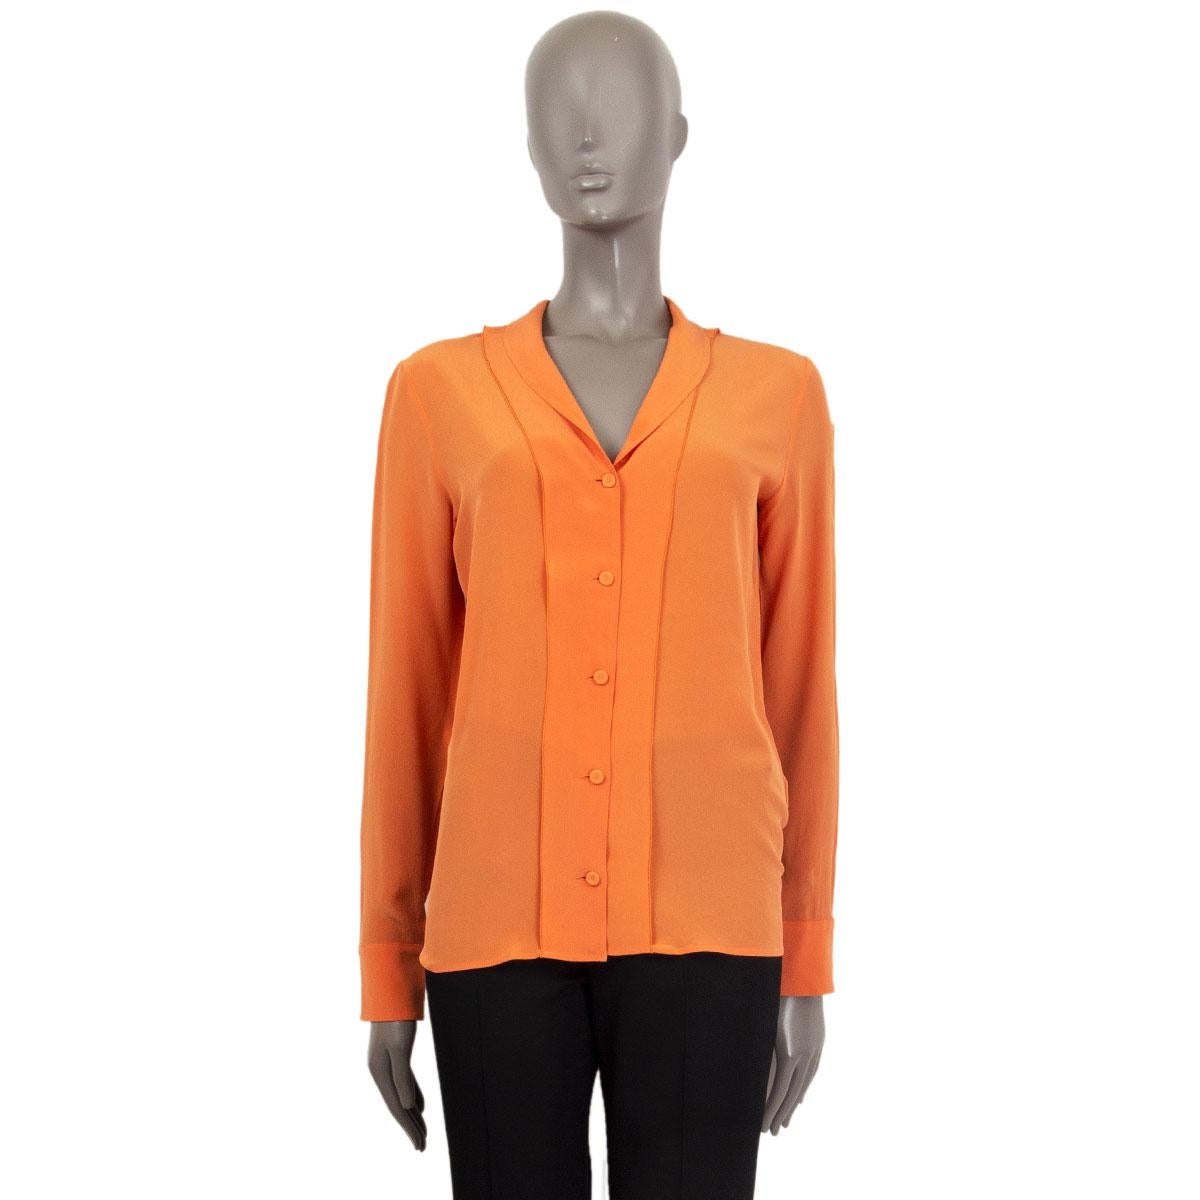 100% authentic Bottega Veneta shirt in orange silk (100%) with shawl collar and long sleeve. Closes with five buttons on the front and has buttoned cuffs. Unlined. Has been worn and is in excellent condition.

Measurements
Tag